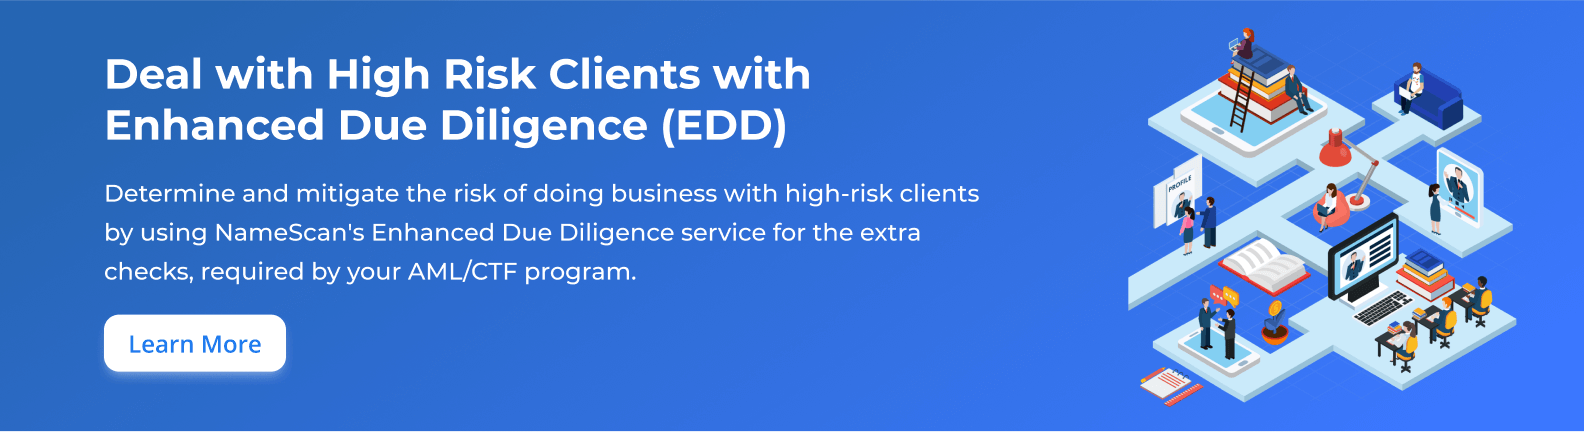 Deal with High Risk Clients with Enhanced Due Diligence (EDD)